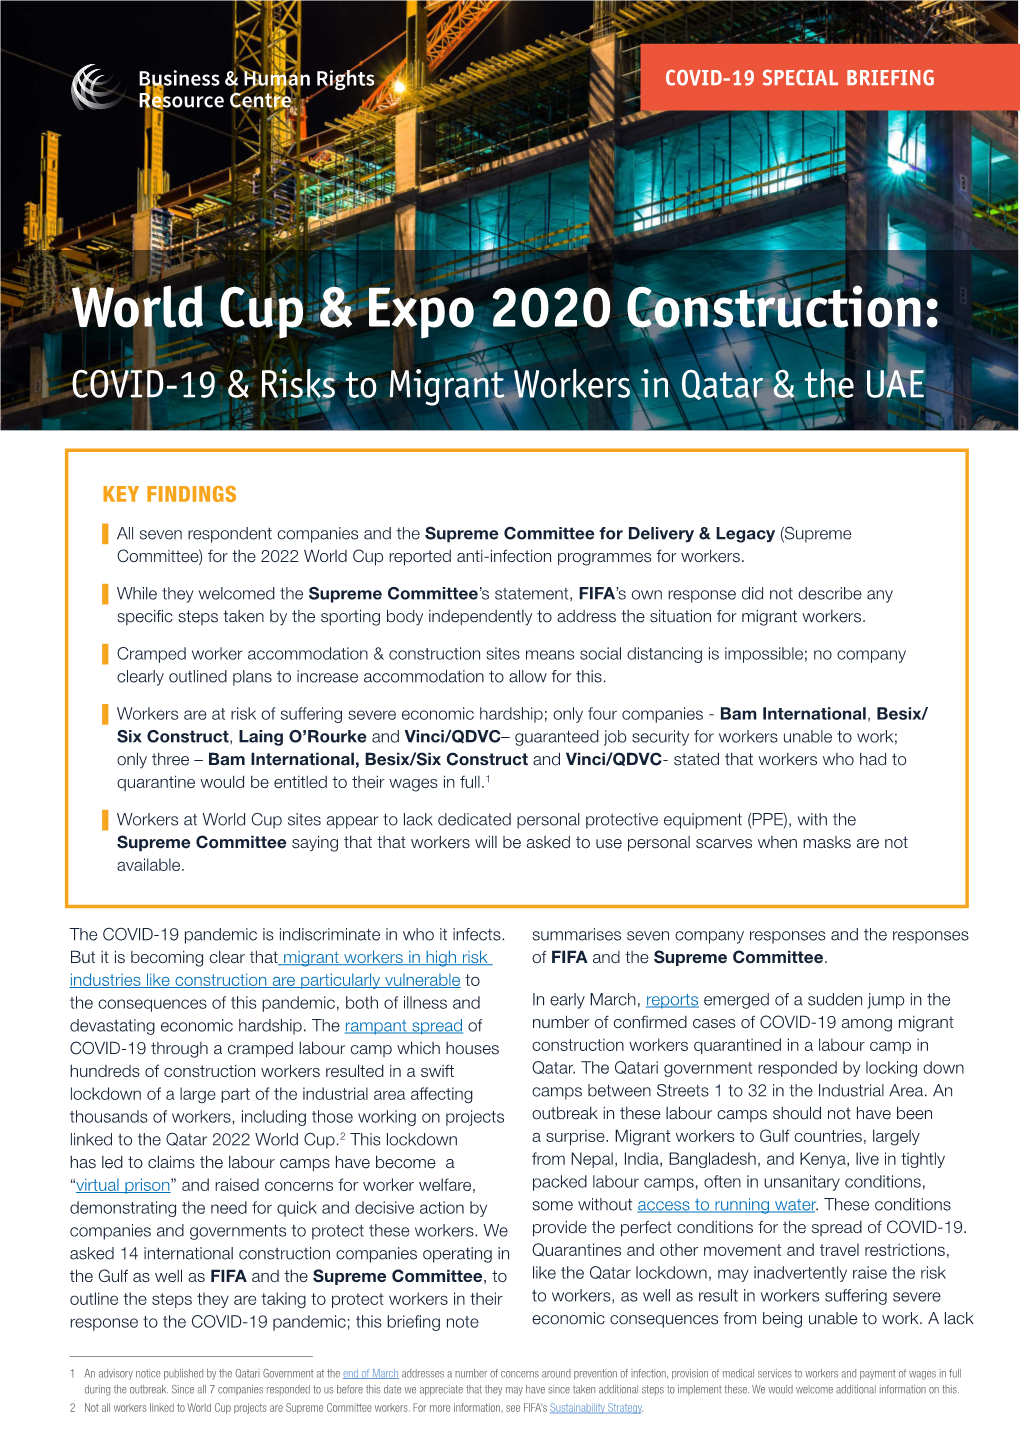 World Cup & Expo 2020 Construction